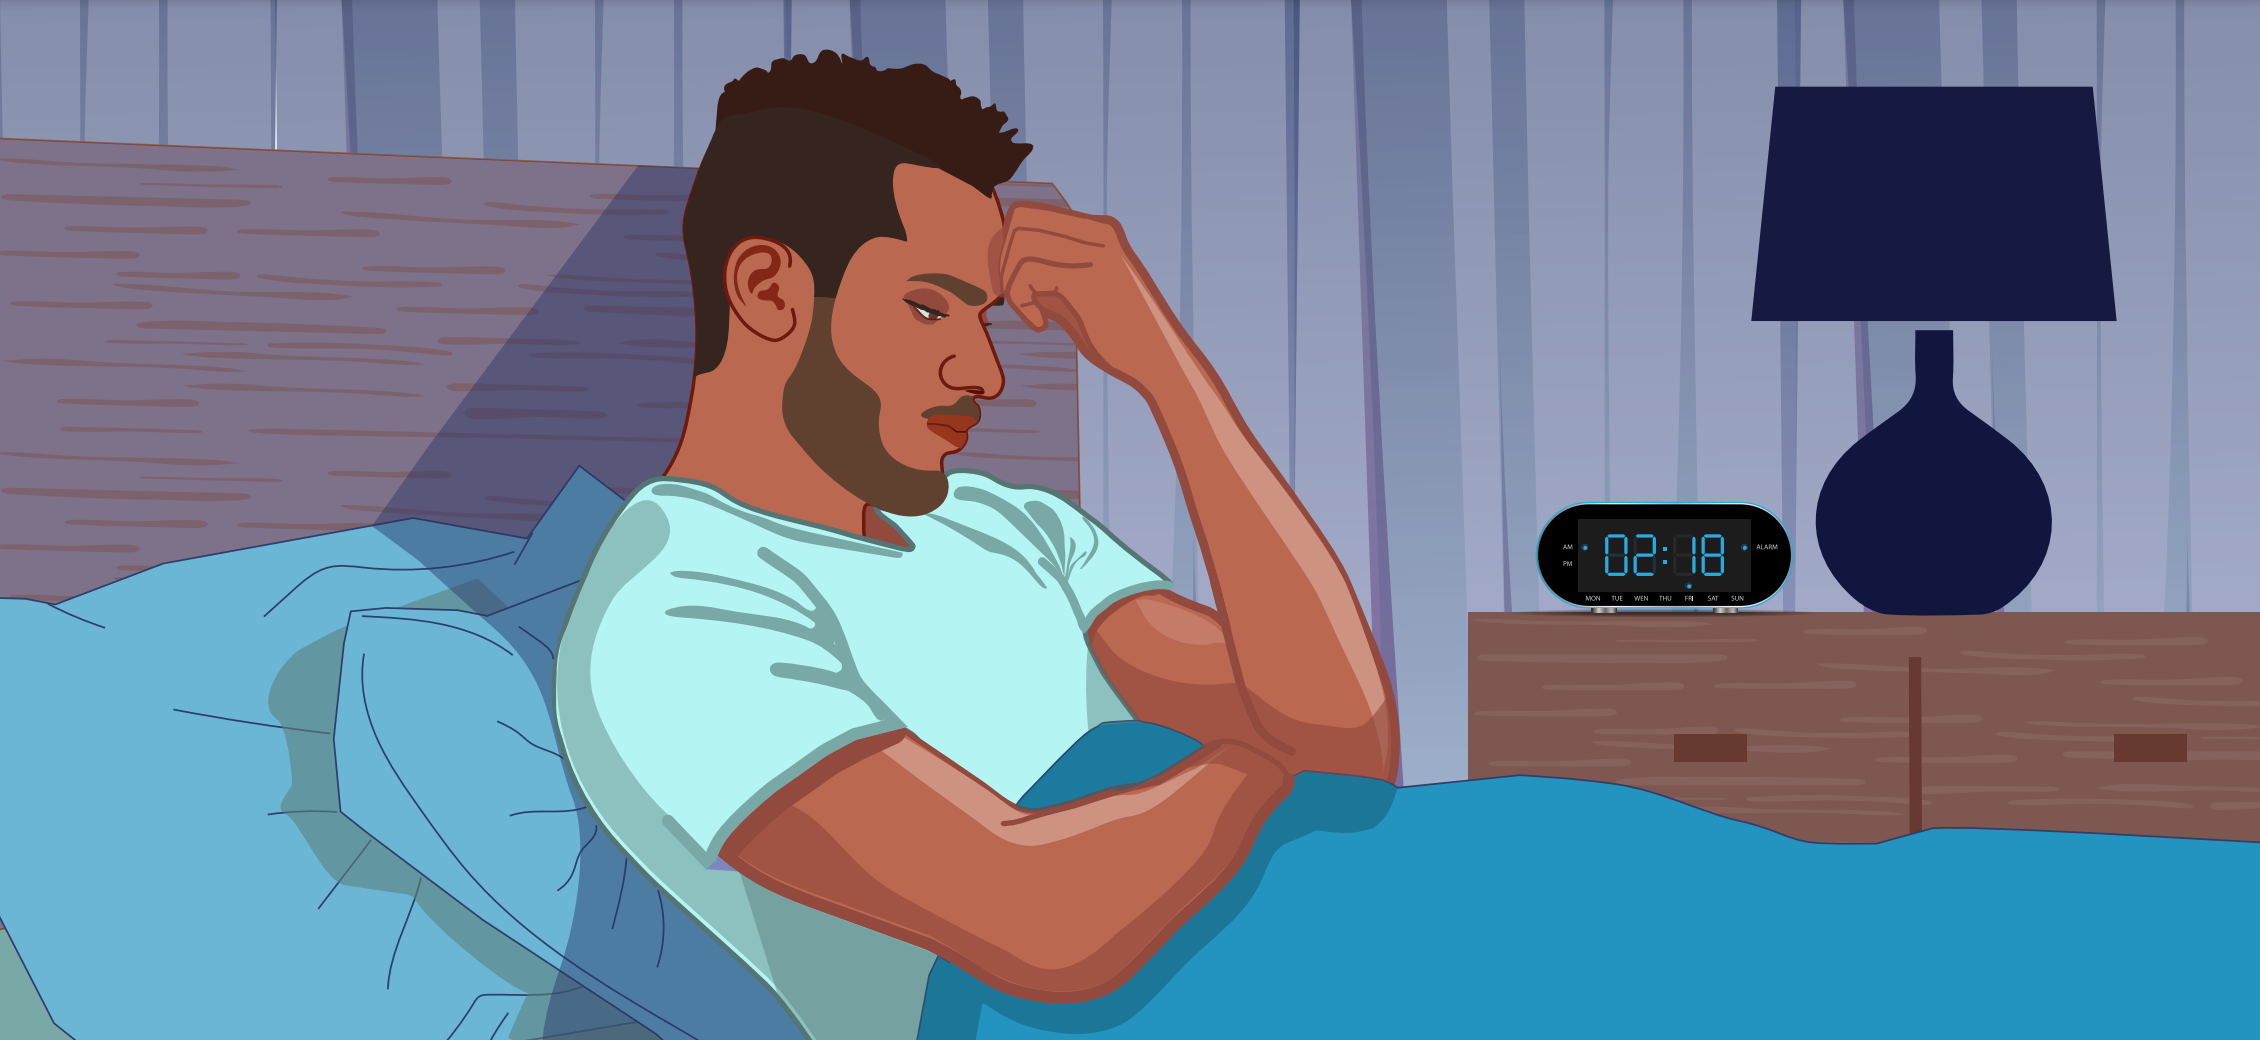 Illustration displays man holding his head in distress in bed.